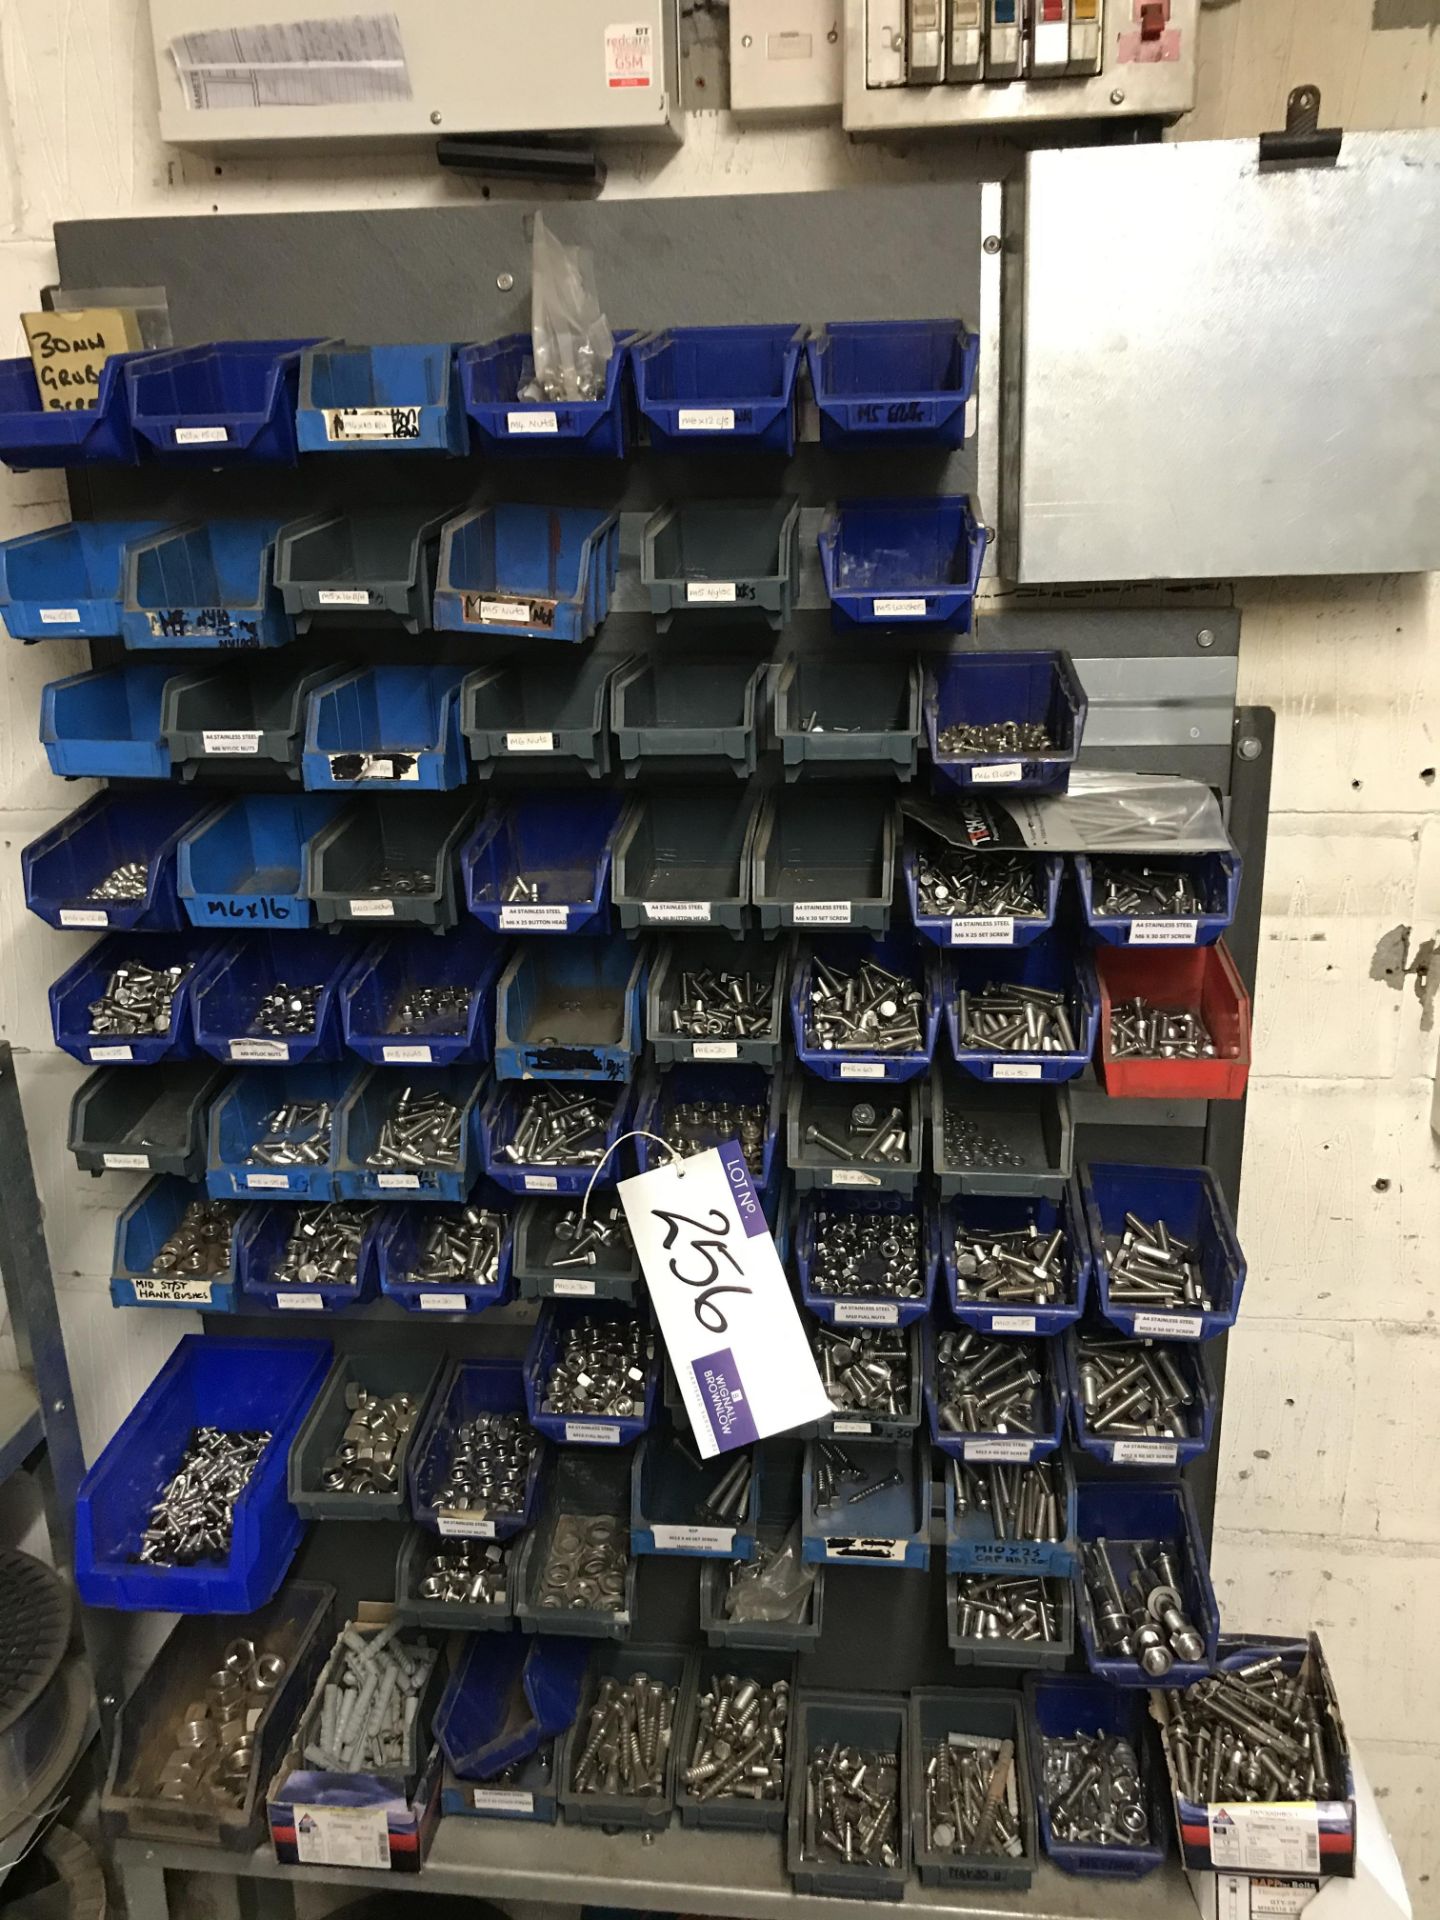 A Quantity of Stainless Steel Fixings in Lin Bins including Nuts, Bolts and Washers.